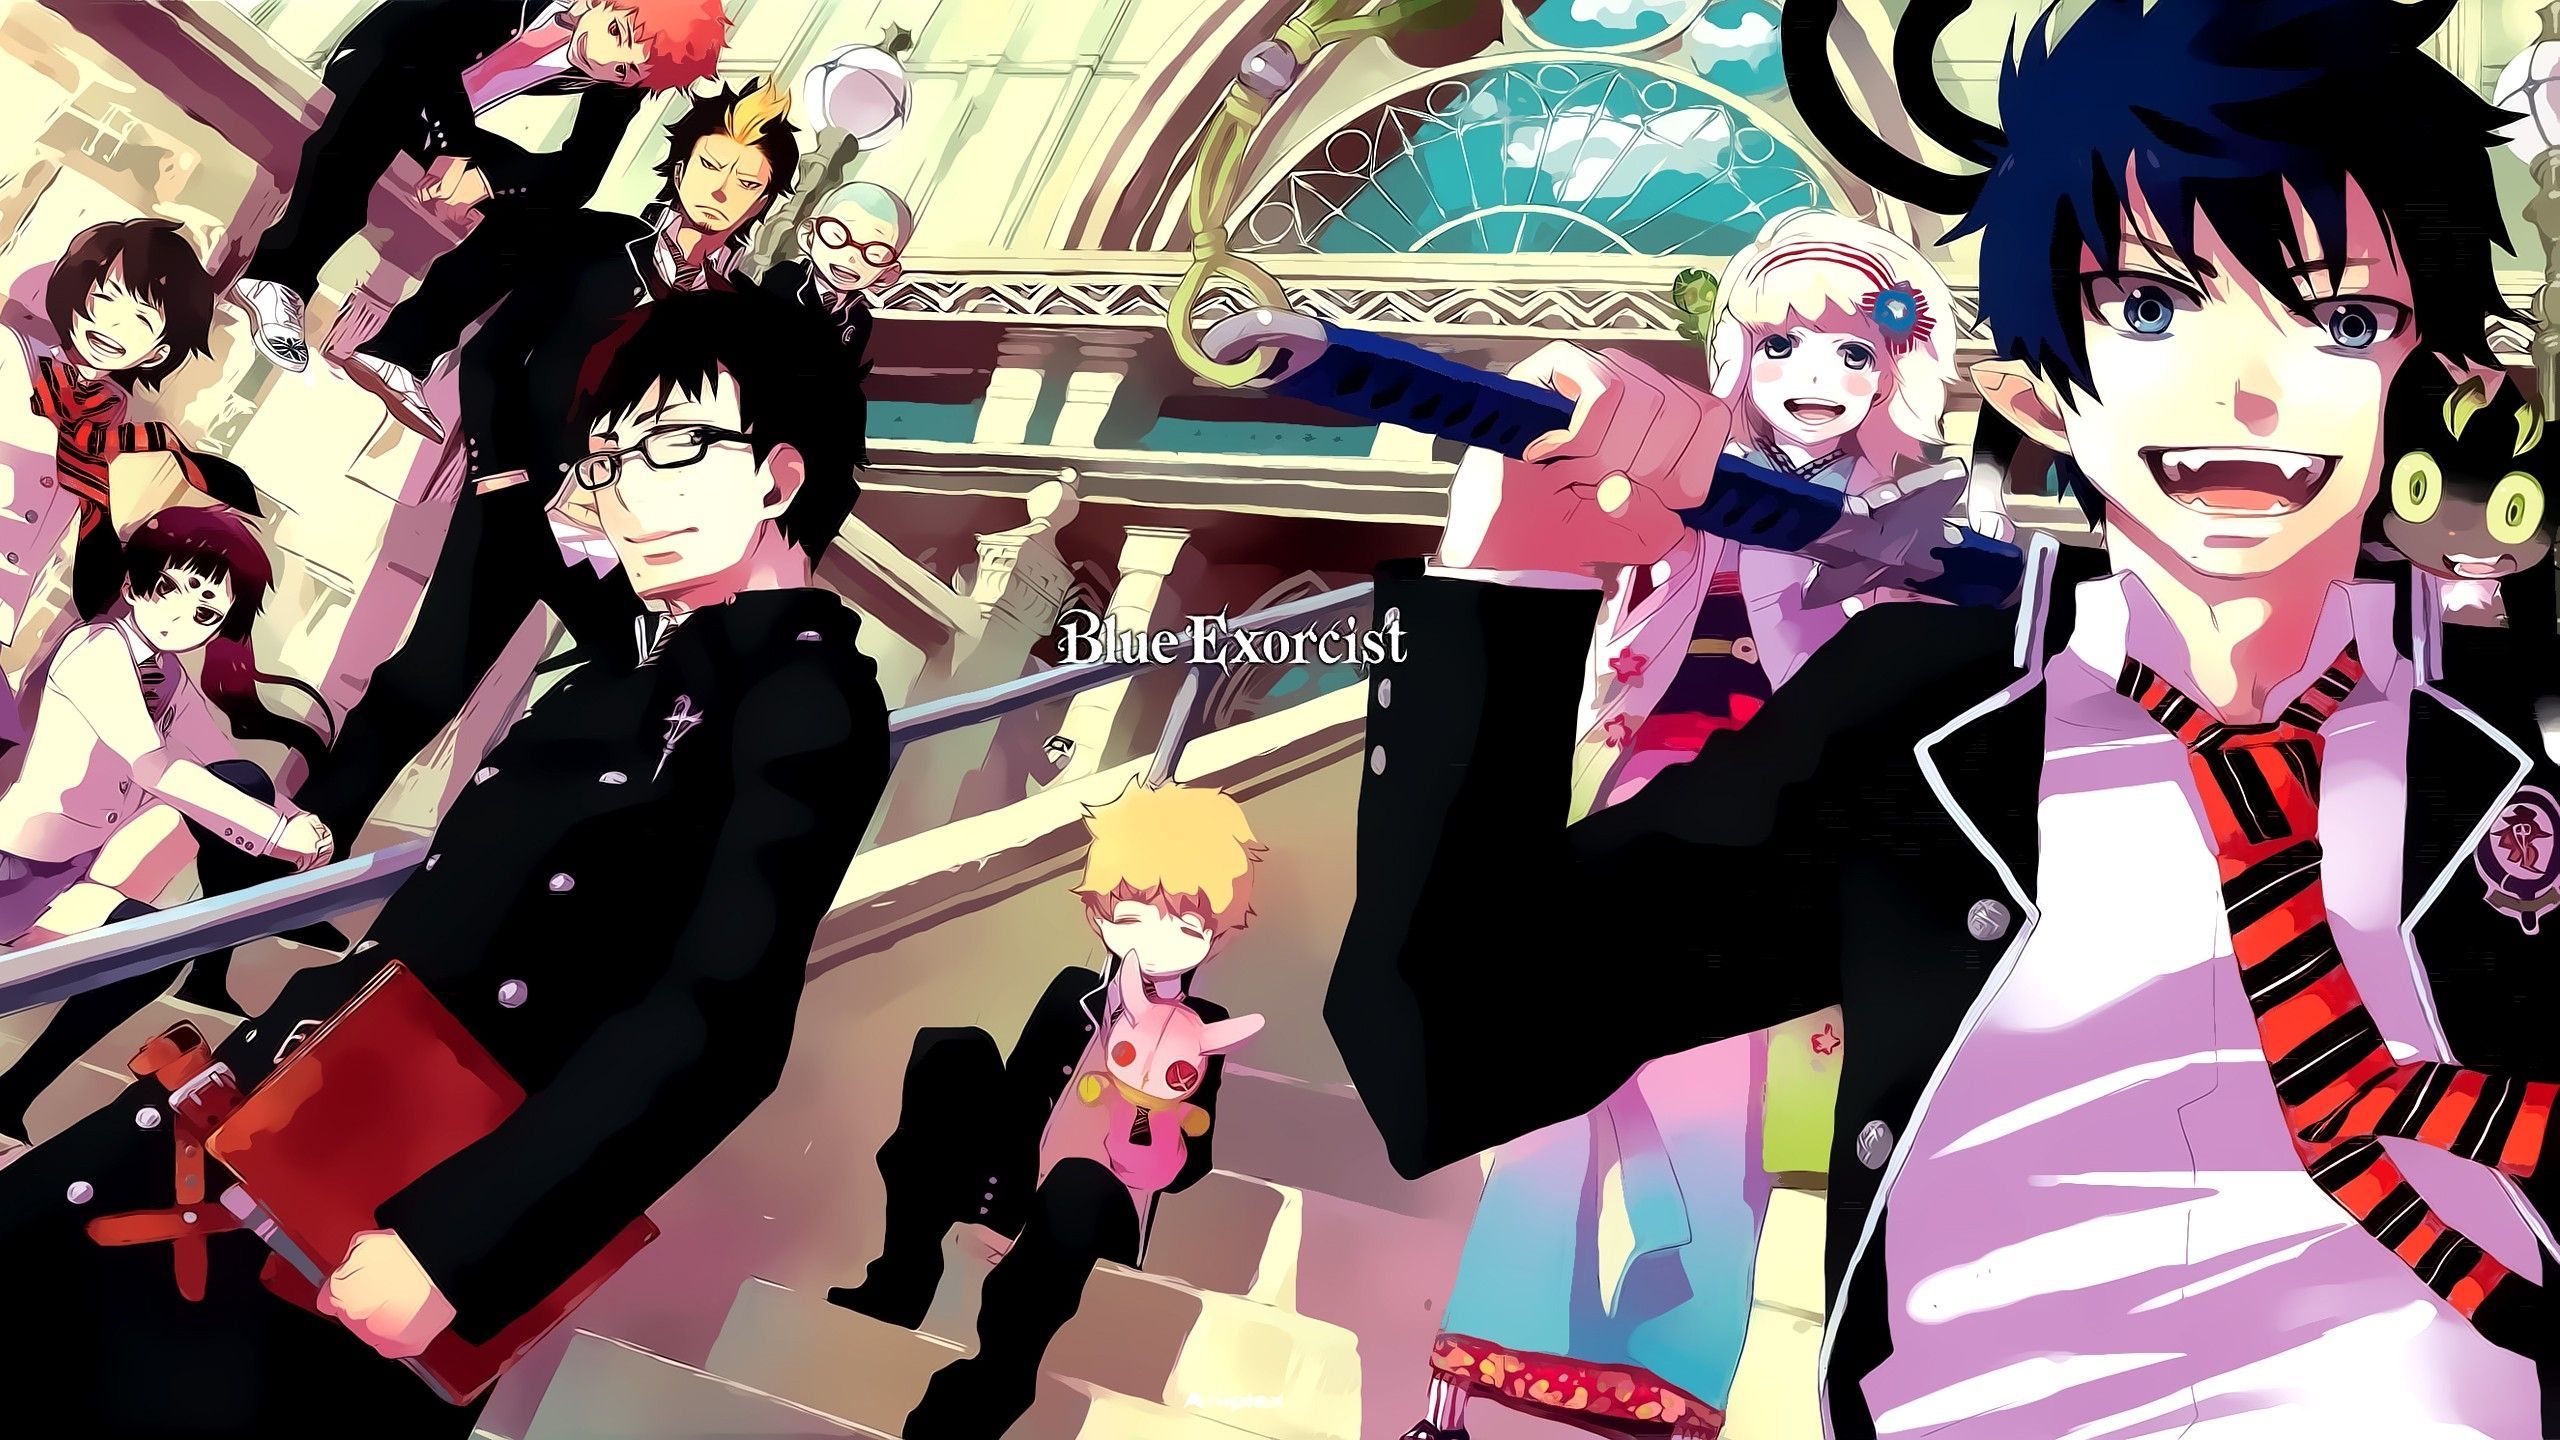 Download Wallpaper 2560x1440 Ao no exorcist background, Anime ...